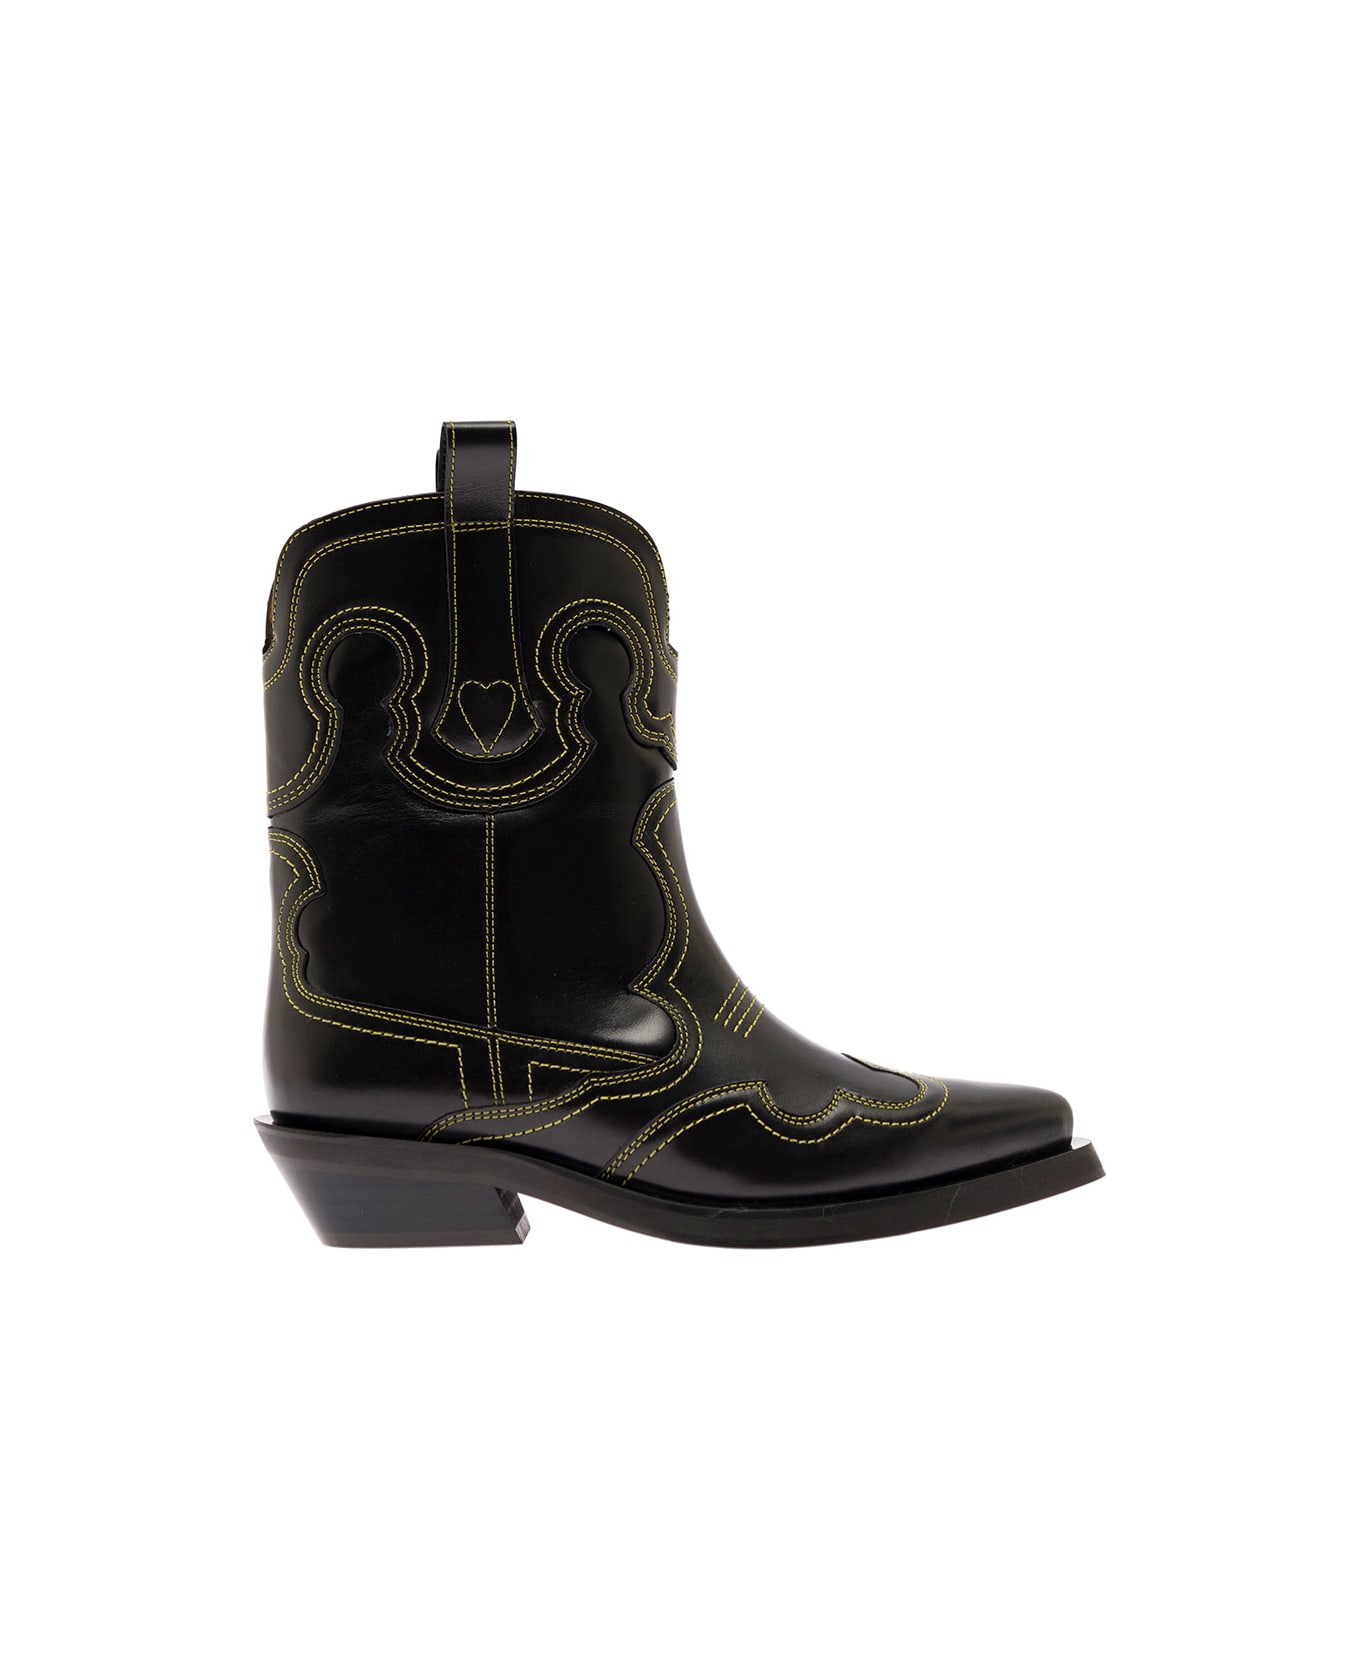 Ganni Black Camperos Boots With Stitchings In Leather Woman - Black